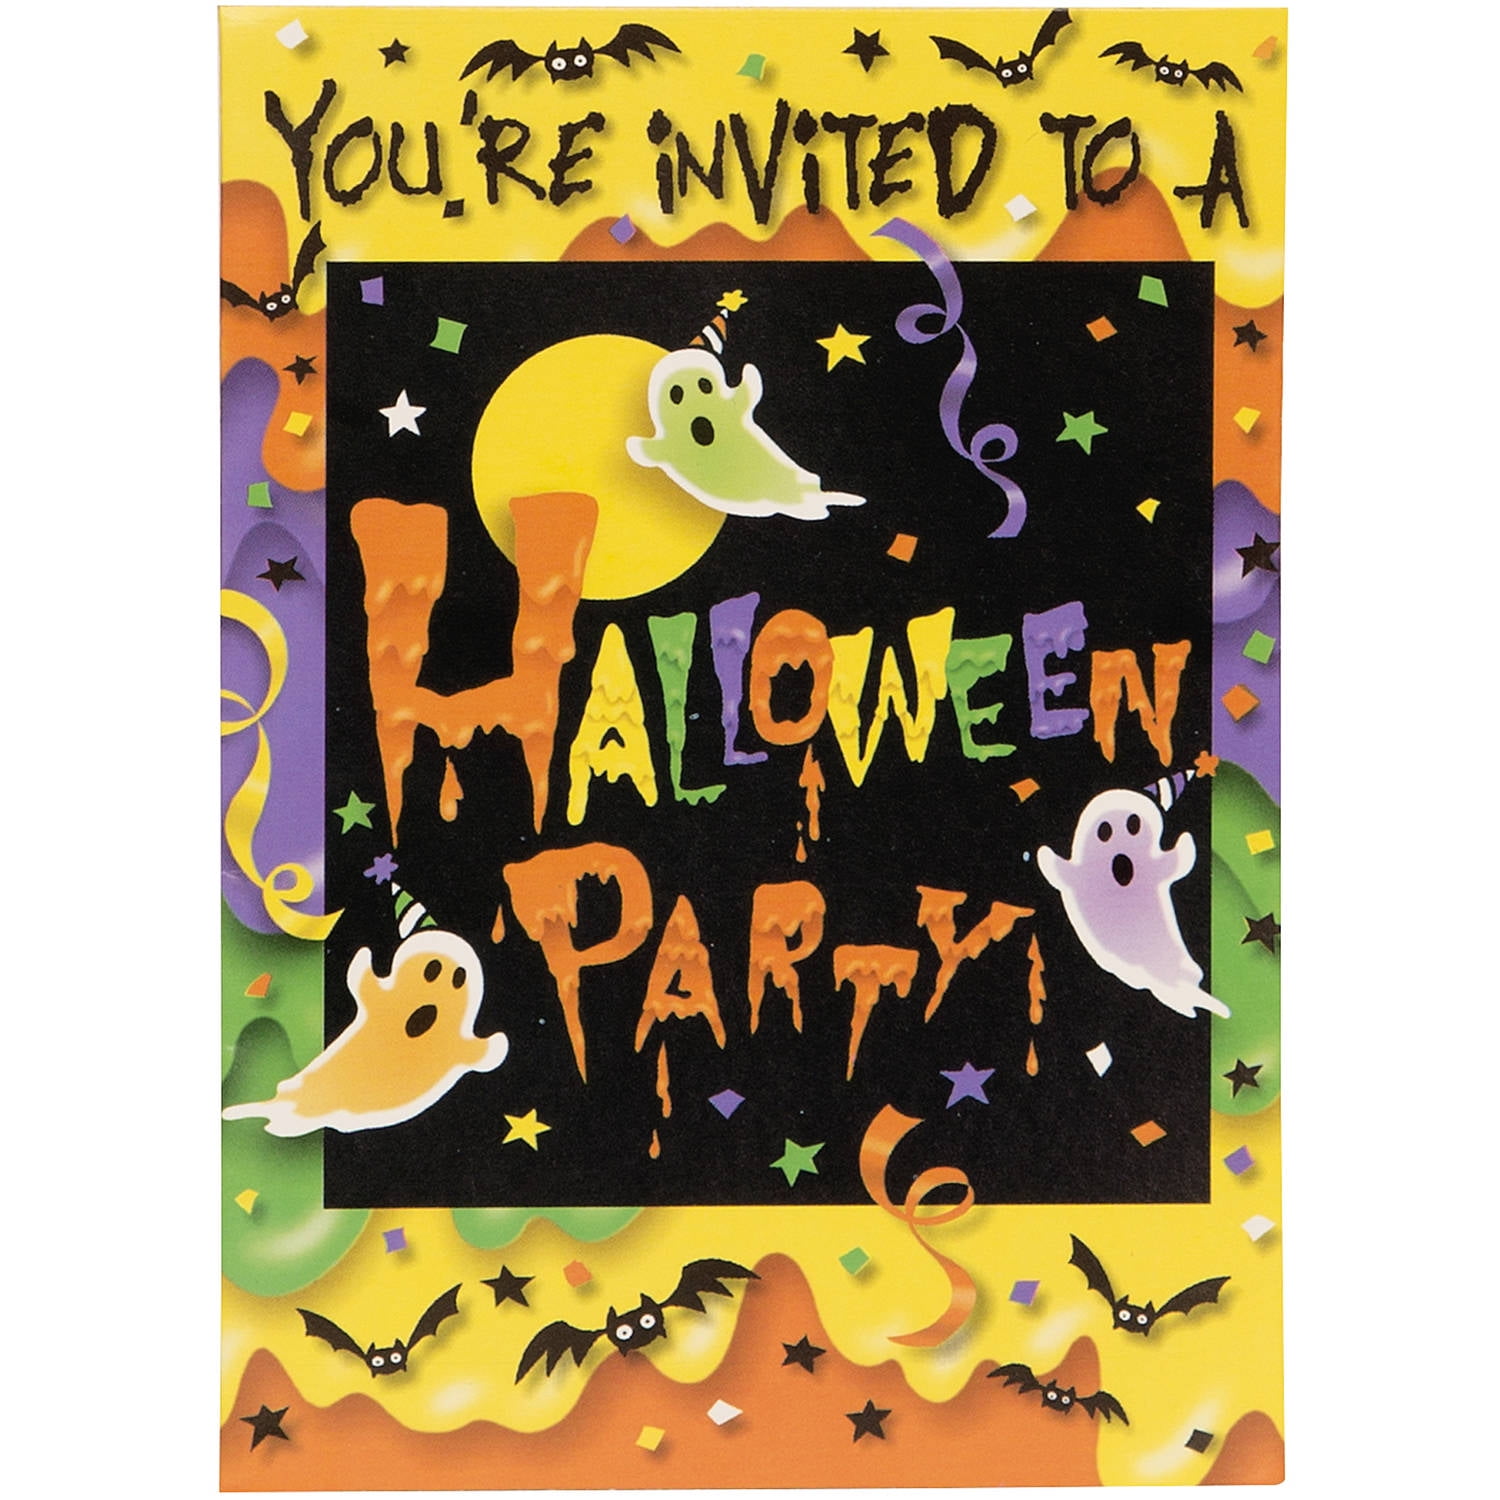 10 x Halloween Party Invitations h6